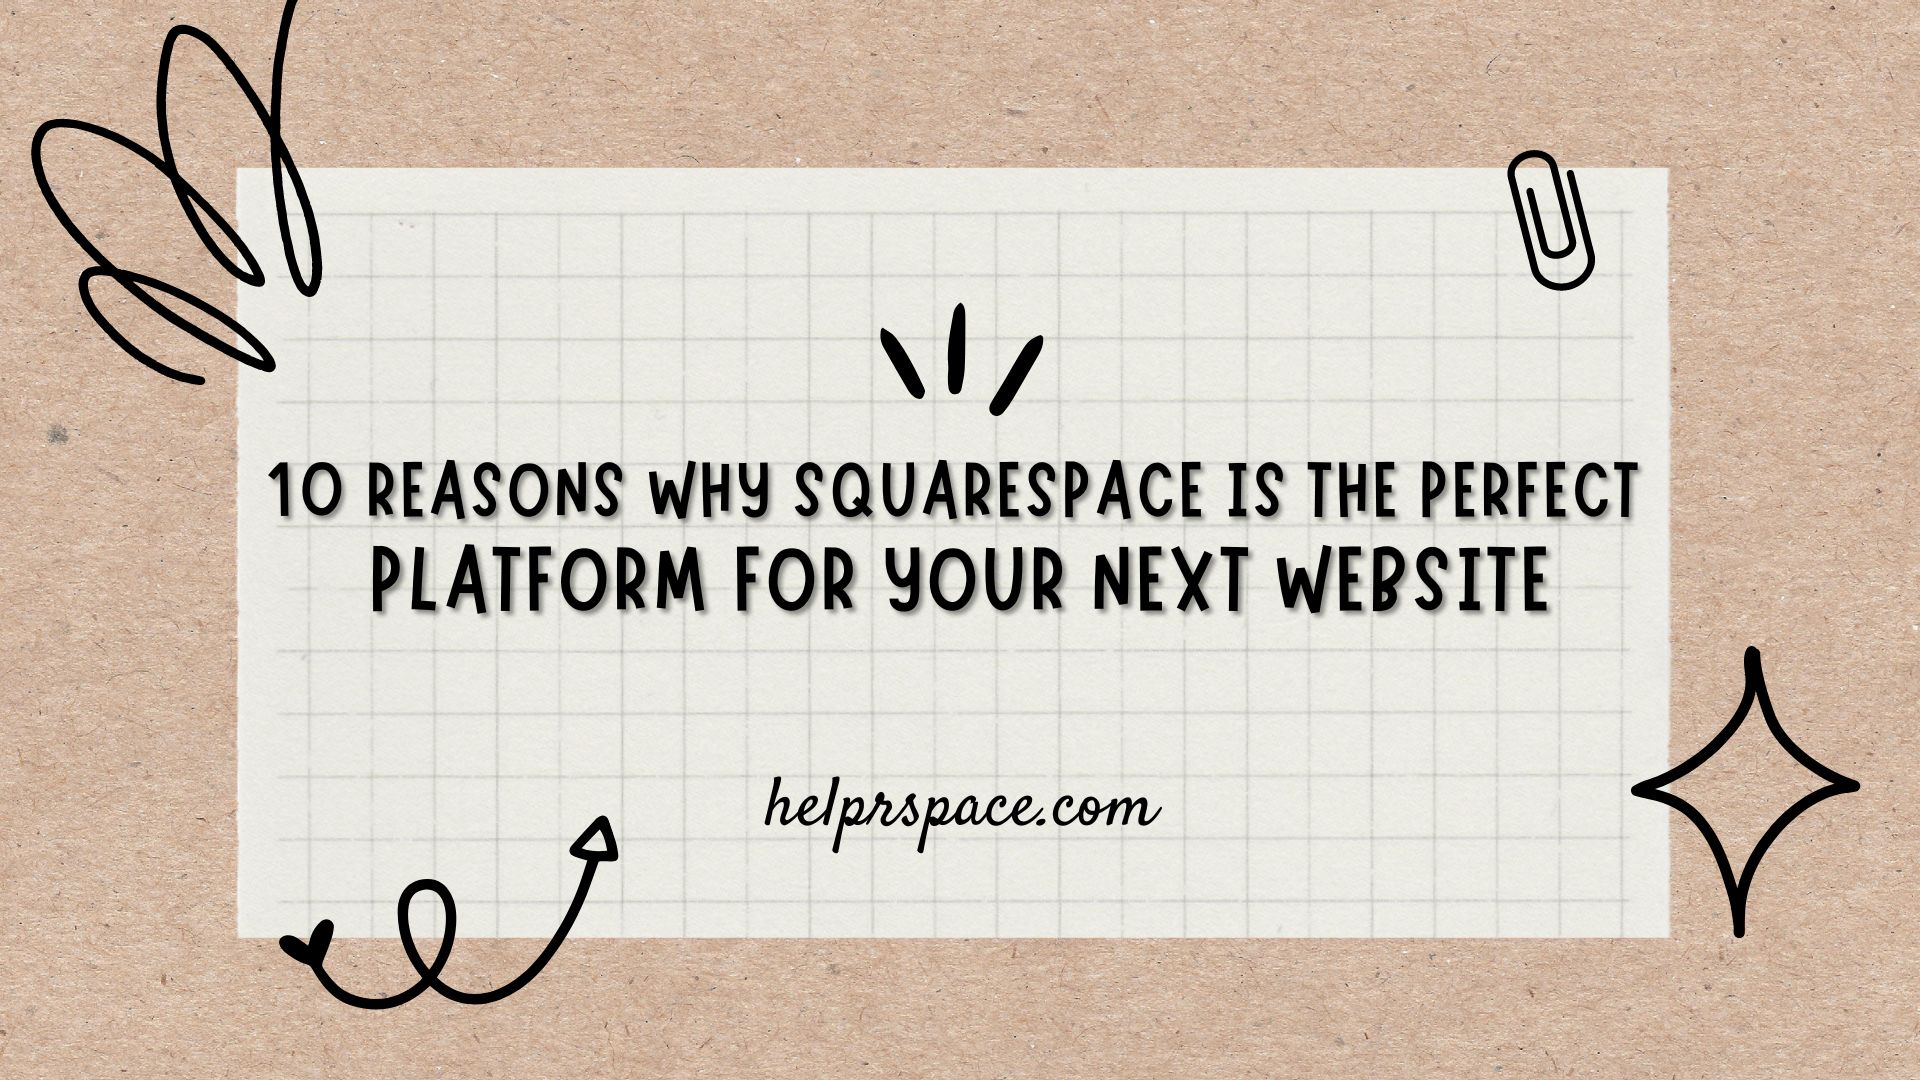 10 Reasons Why Squarespace is the Perfect Platform for Your Next Website